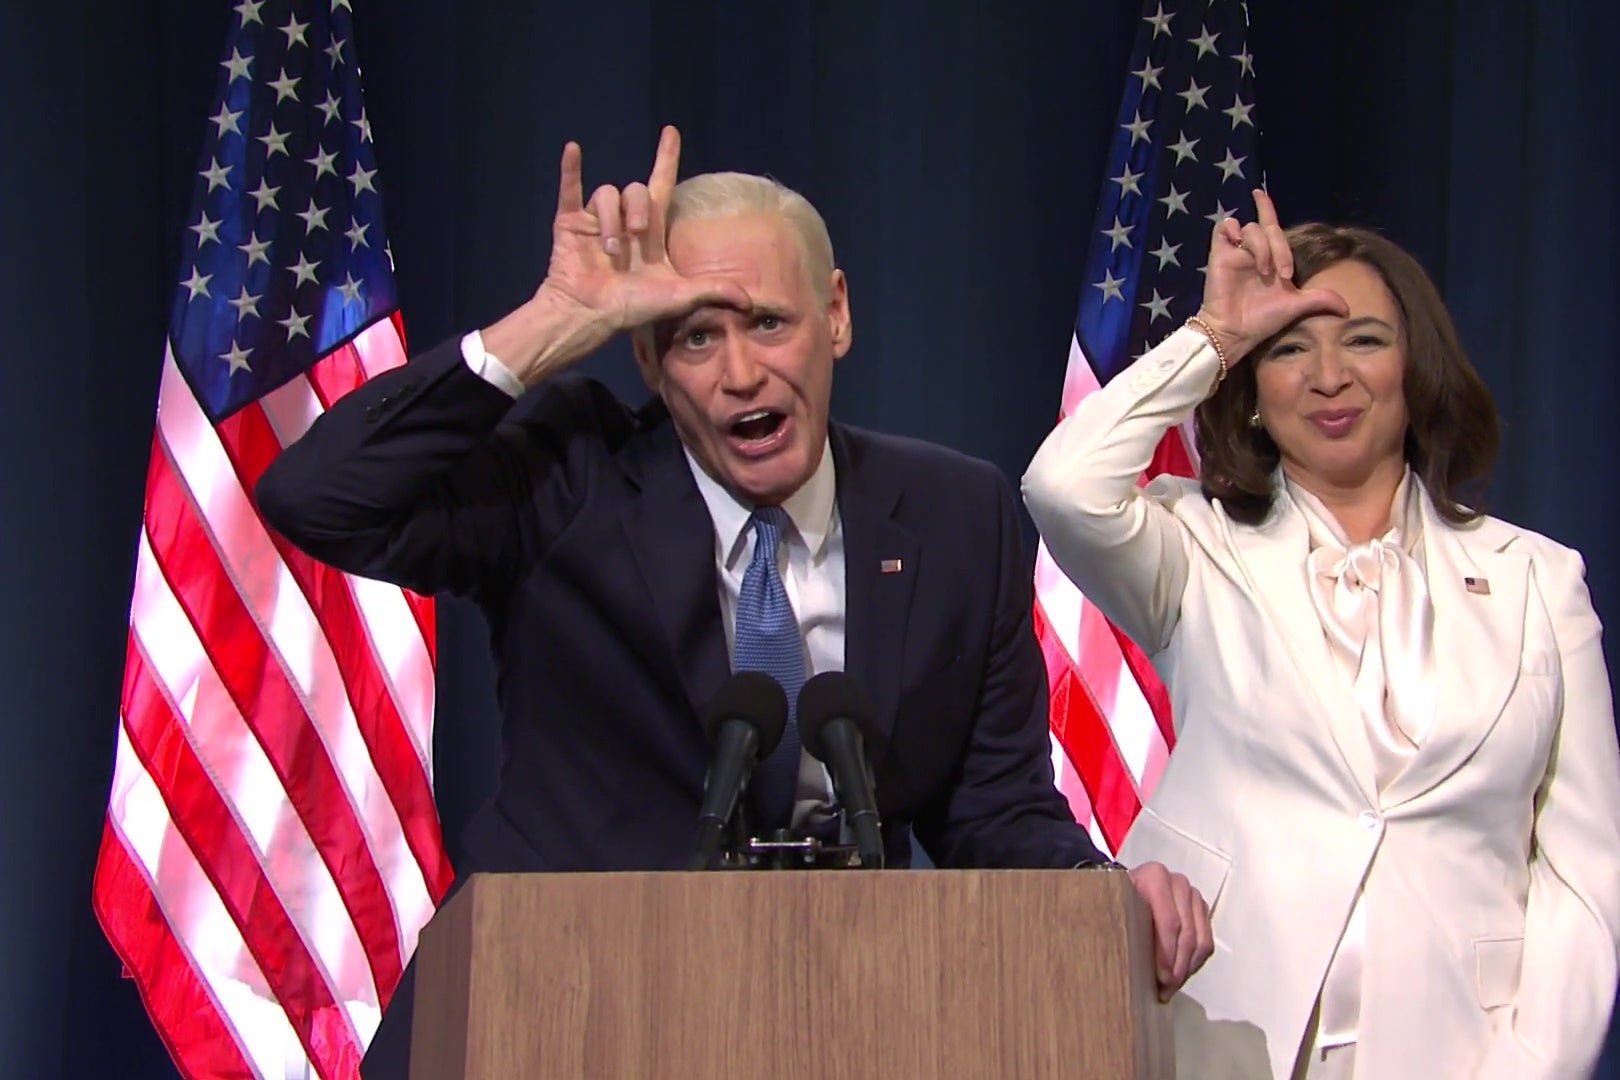 Jim Carrey as Joe Biden and Maya Rudolph as Kamala Harris both put their hands to their foreheads in the shape of an "L" in a still from SNL.